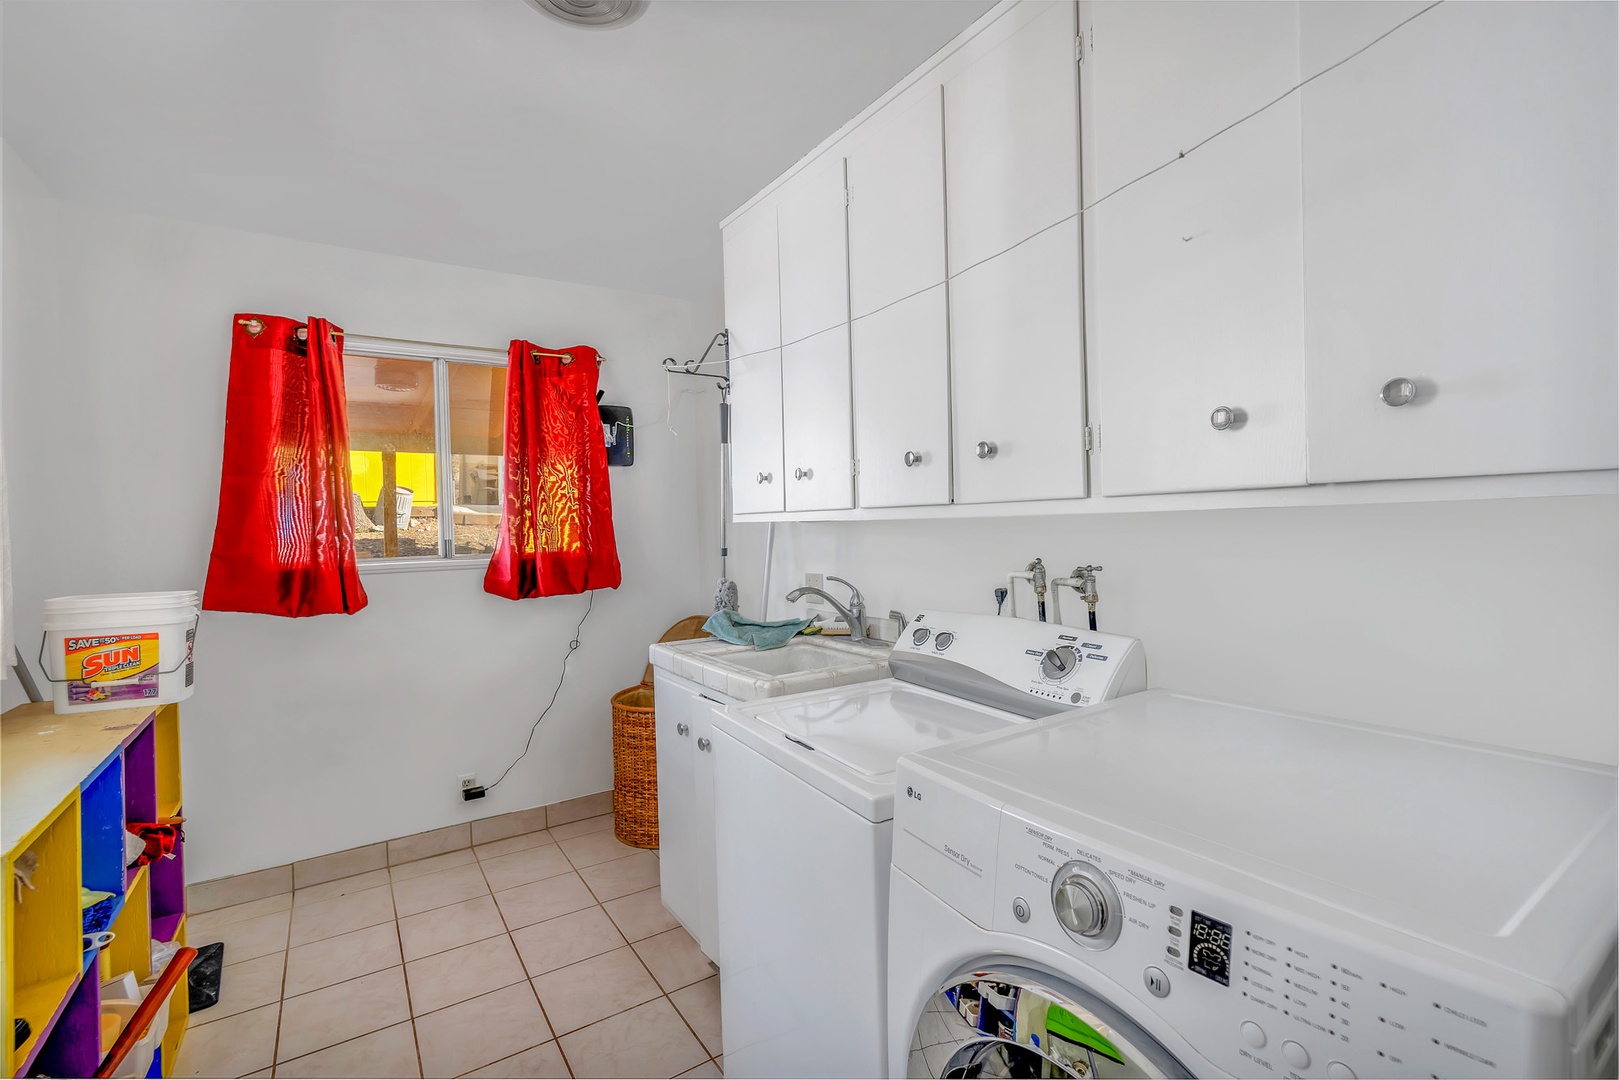 Washer and dryer in laundry room